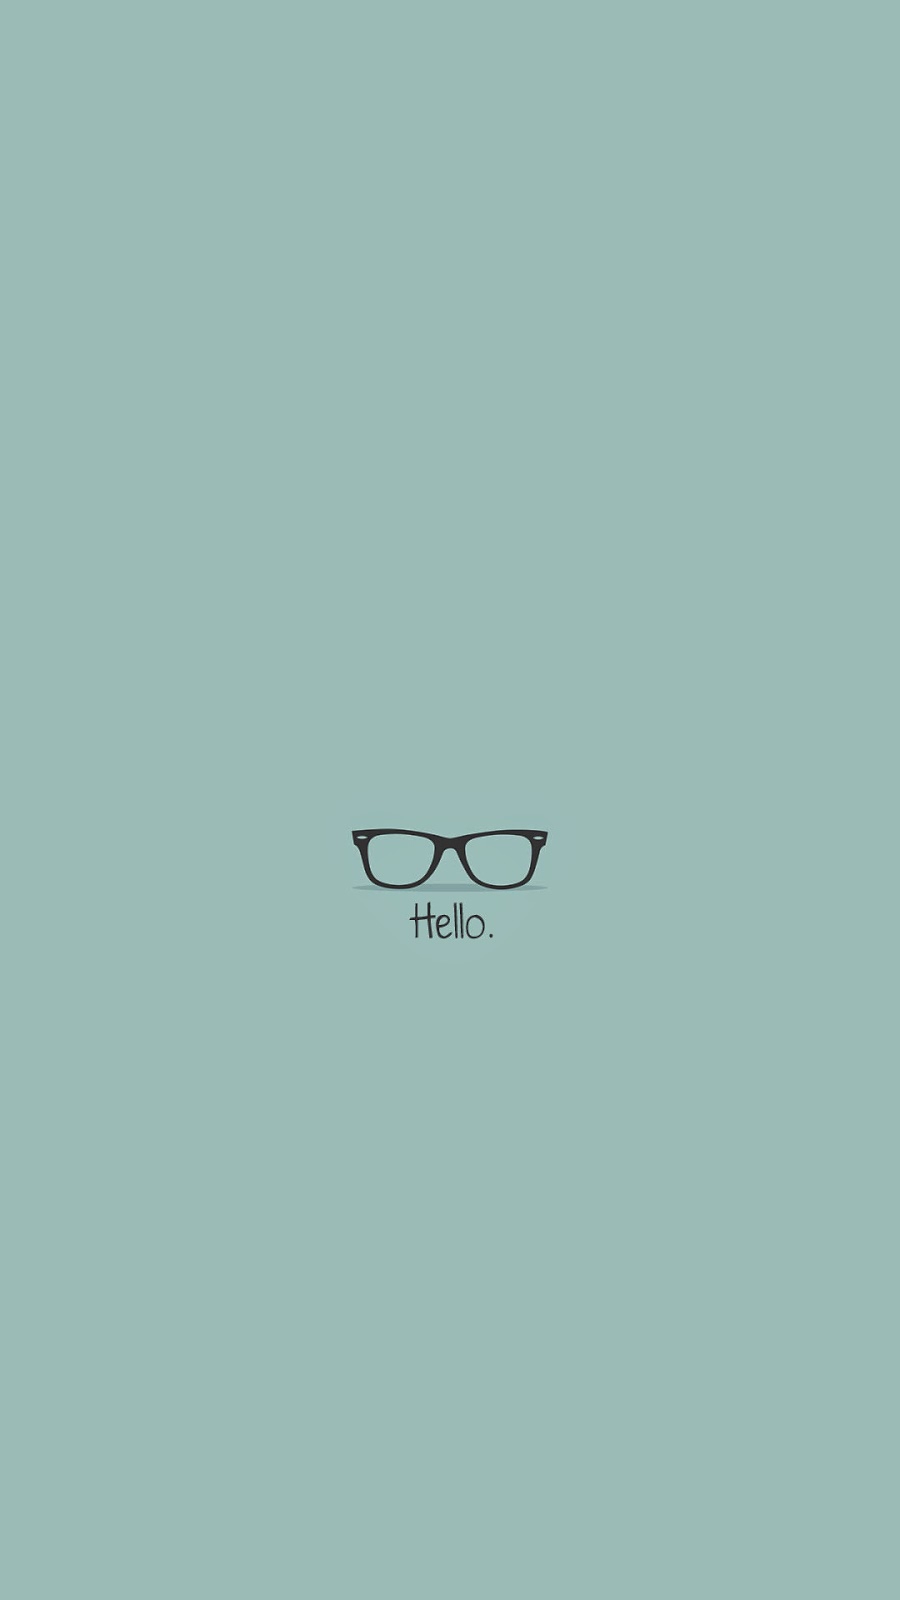 hipster wallpaper iphone 6,eyewear,glasses,green,sunglasses,product